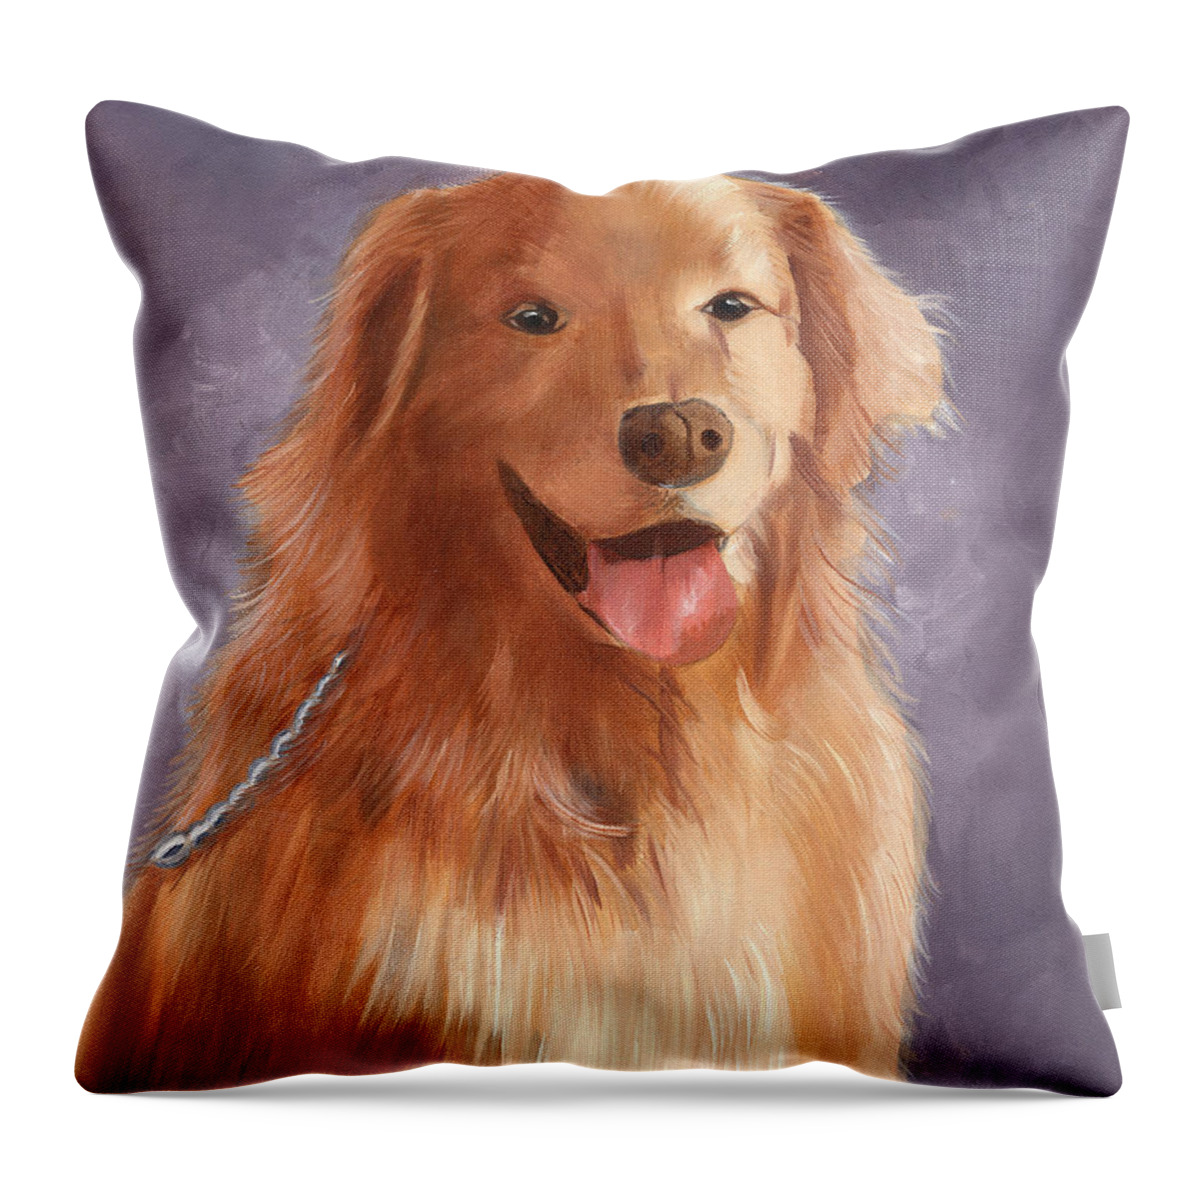 Pets Throw Pillow featuring the painting Sir Angus by Kathie Camara